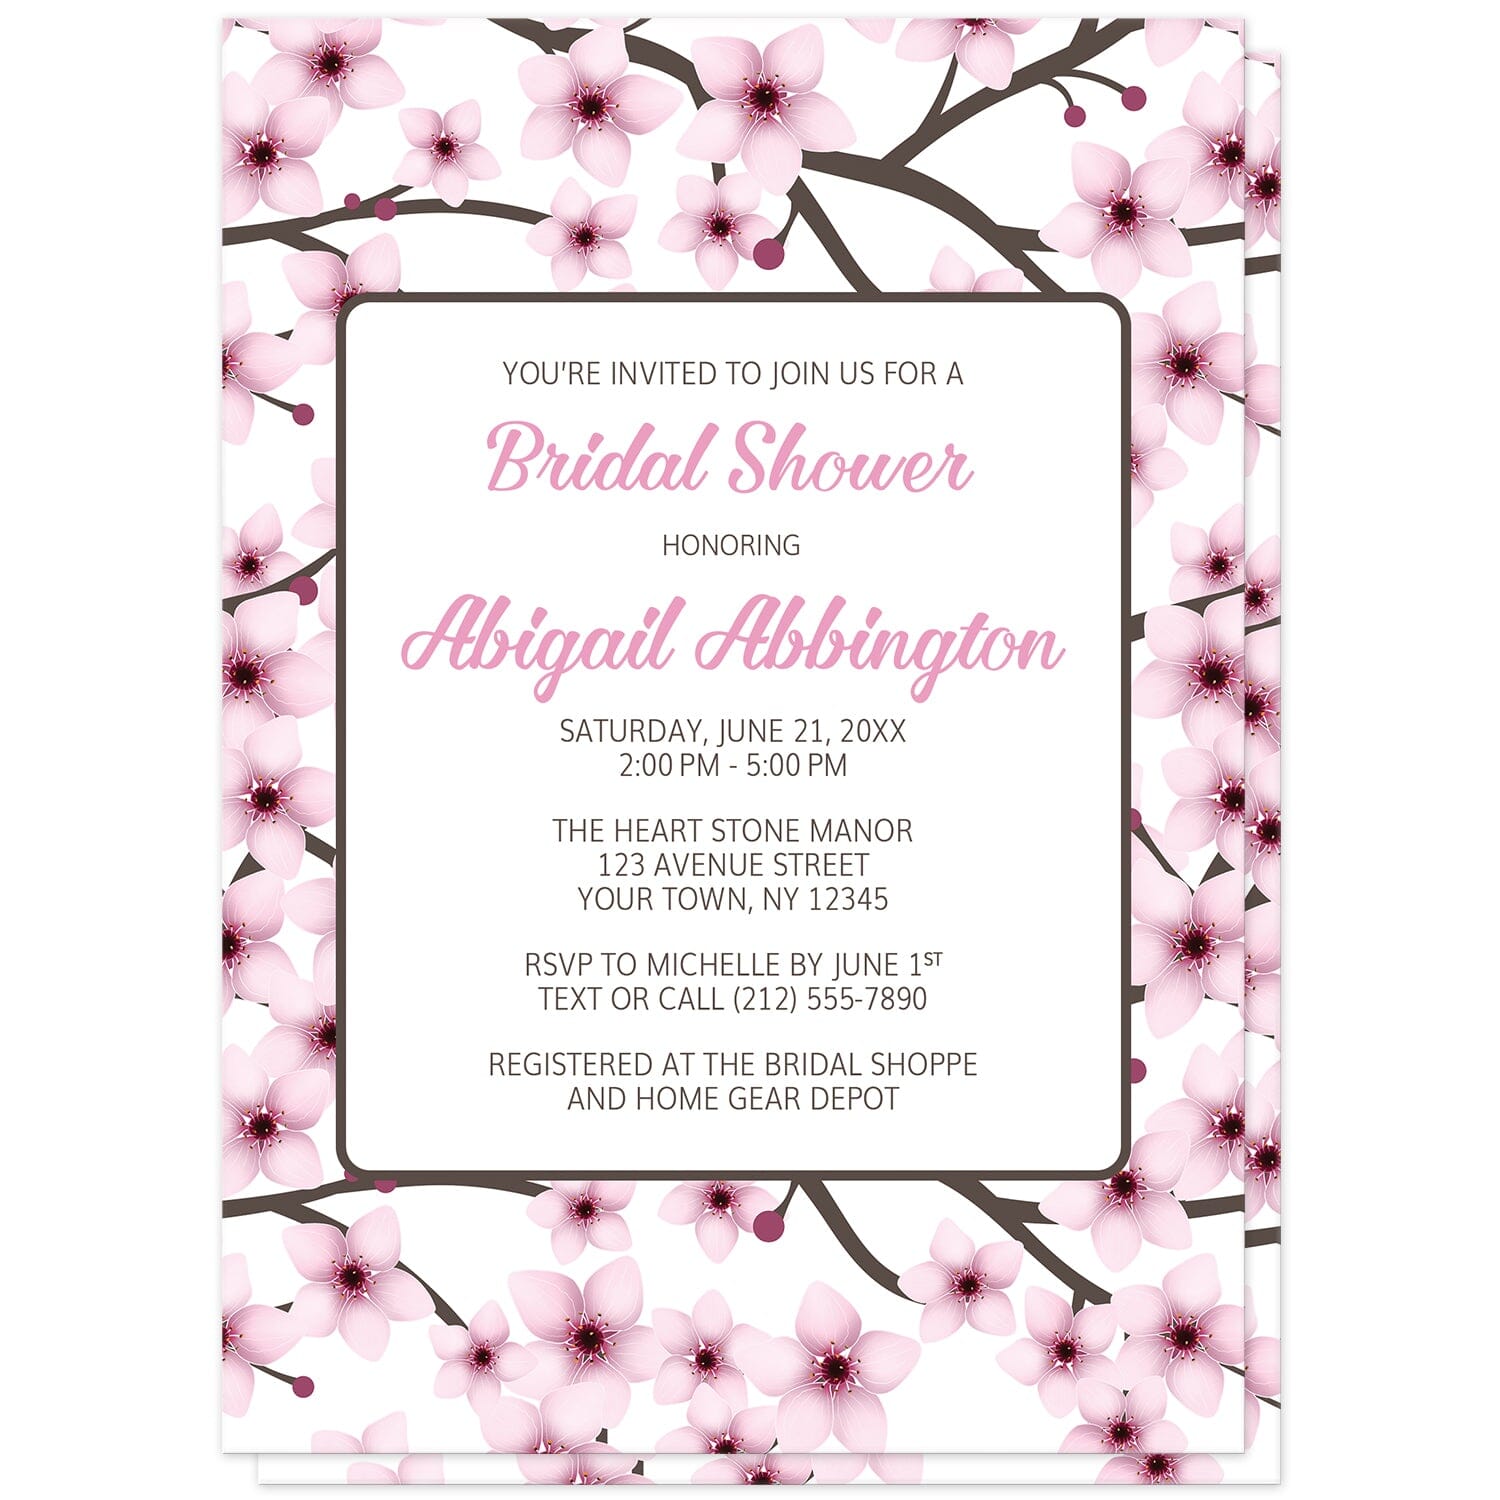 Cherry Blossom Bridal Shower Invitations (front) at Artistically Invited. Cherry blossom bridal shower invitations designed with a gorgeous pattern of pink cherry blossom branches. This beautiful floral background design is also printed on the back side of the invitations. Personalize these invitations with your bridal shower celebration details in pink and dark brown in a white rectangular area over the pretty cherry blossoms. 